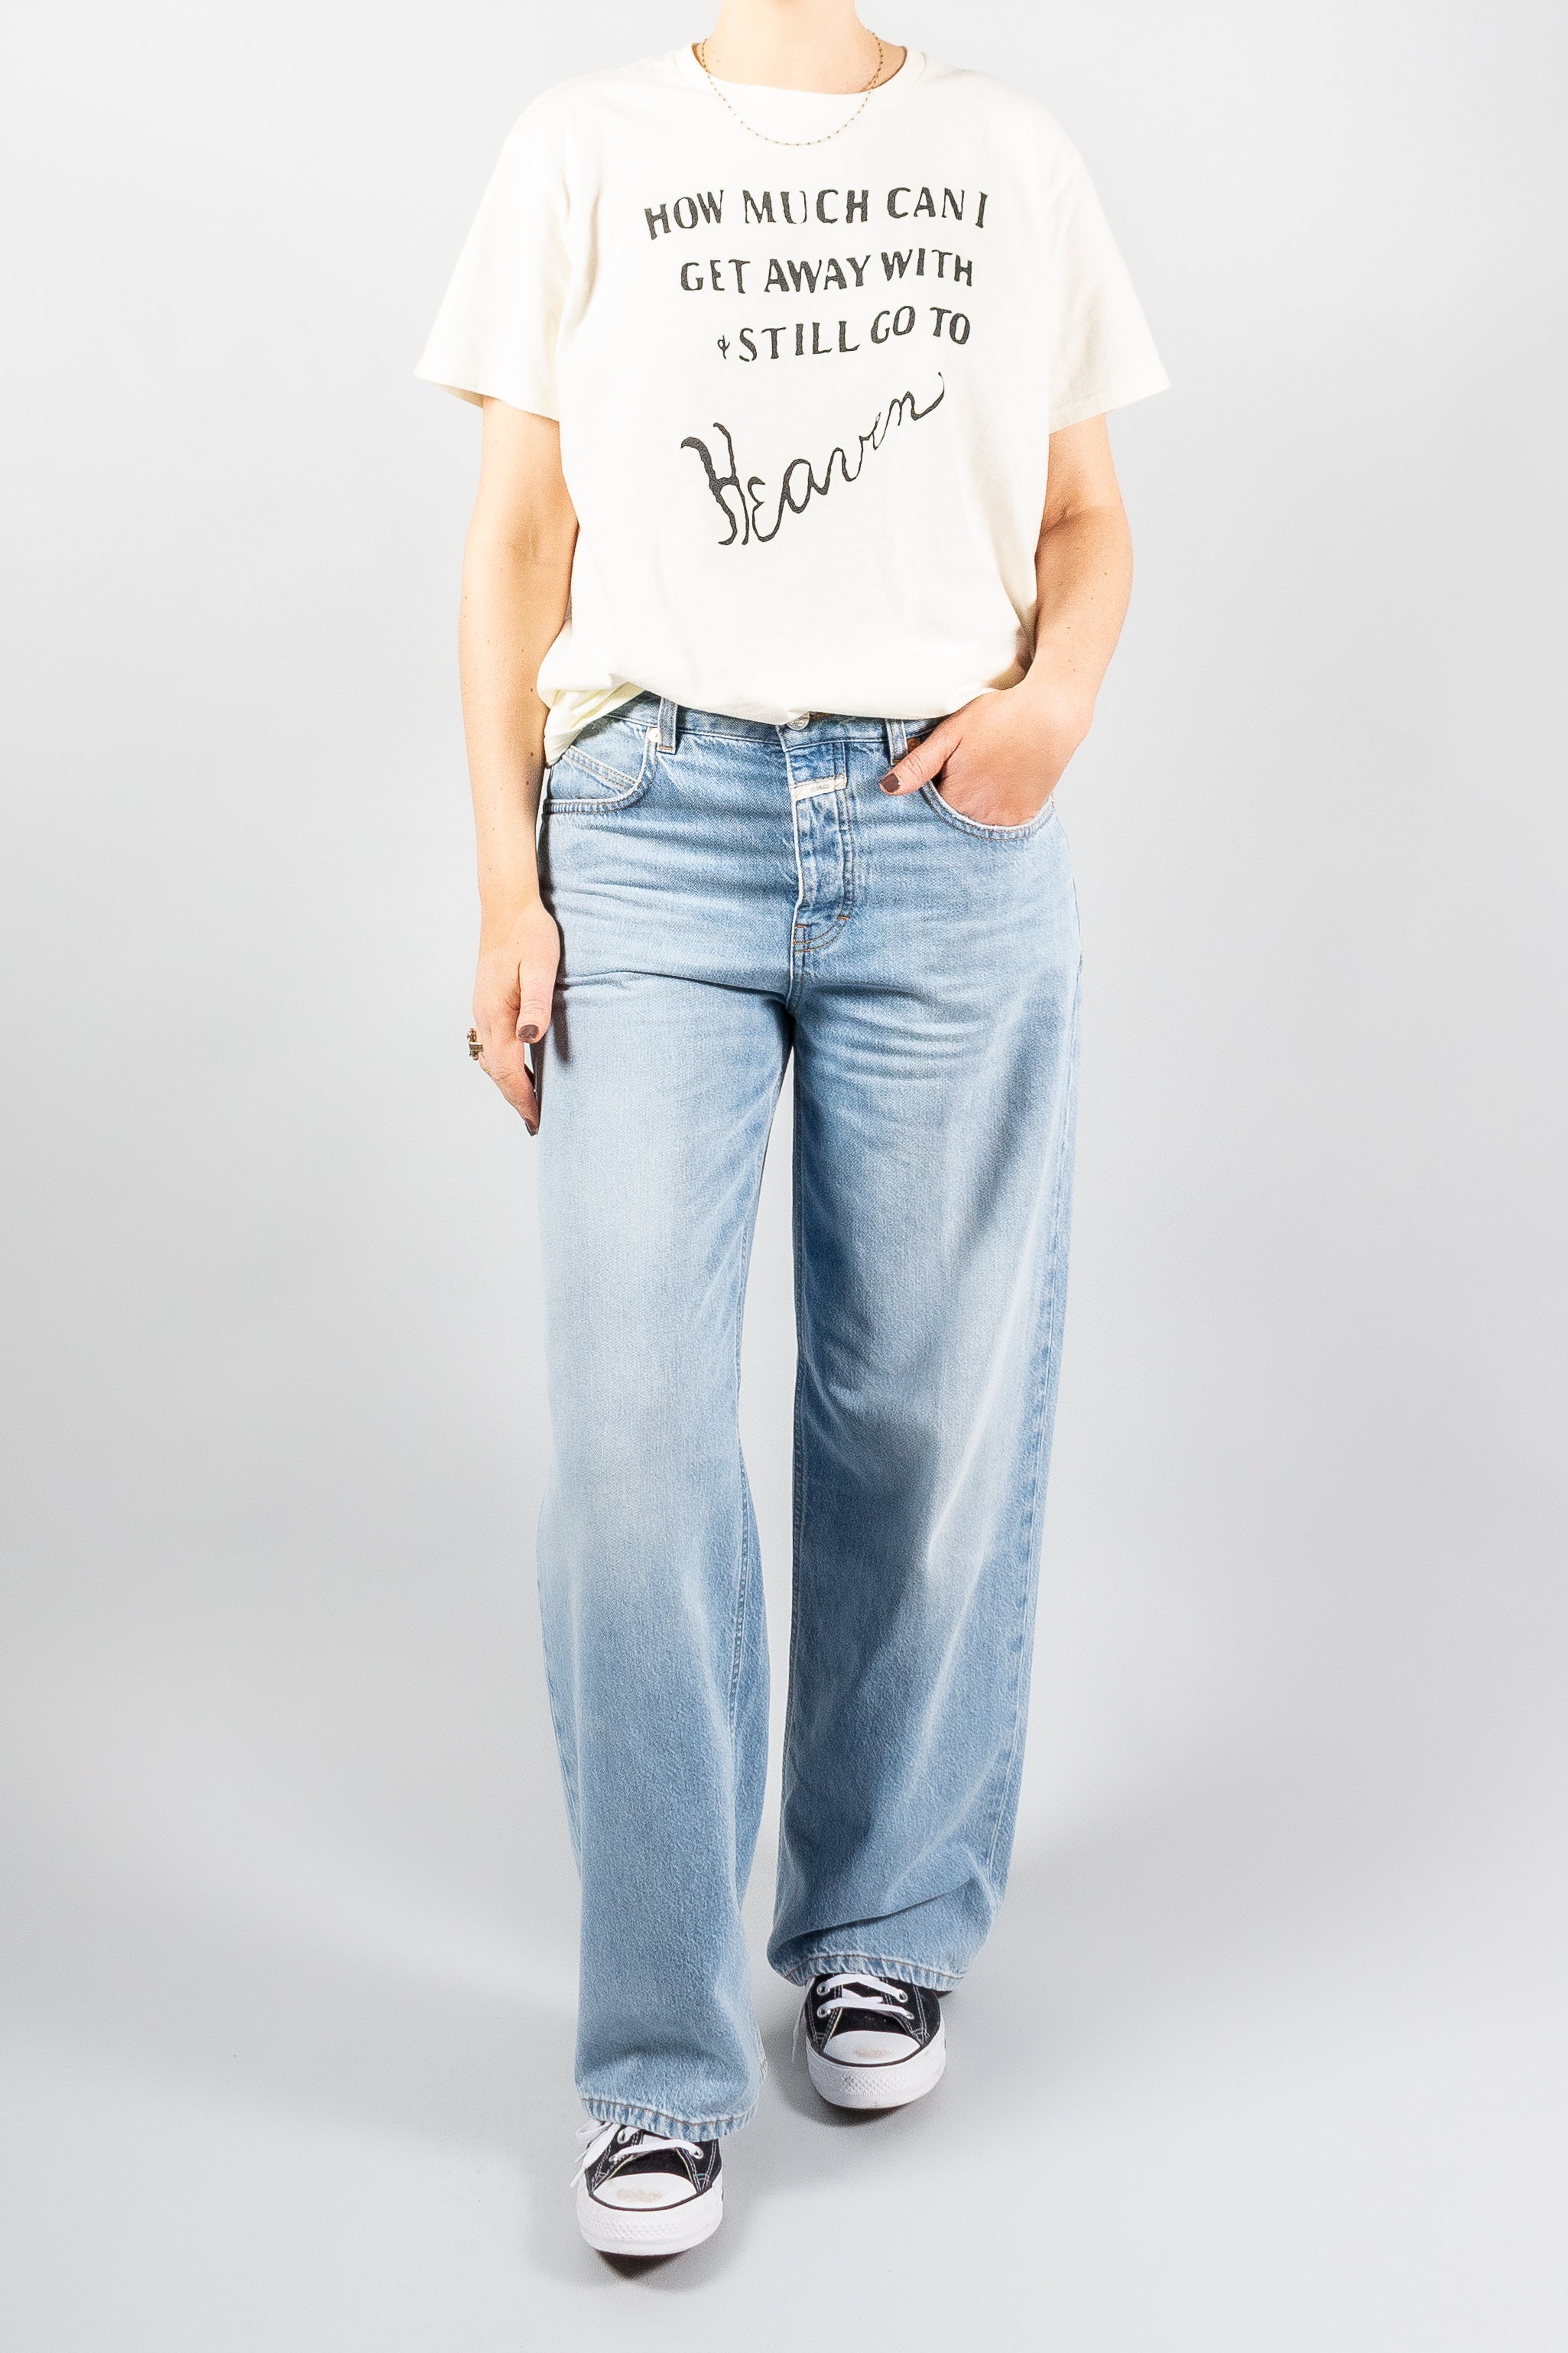 R13 Denim 'How Much Can I Get Away With' Boy T-Shirt-Tops-Misch-Boutique-Vancouver-Canada-misch.ca